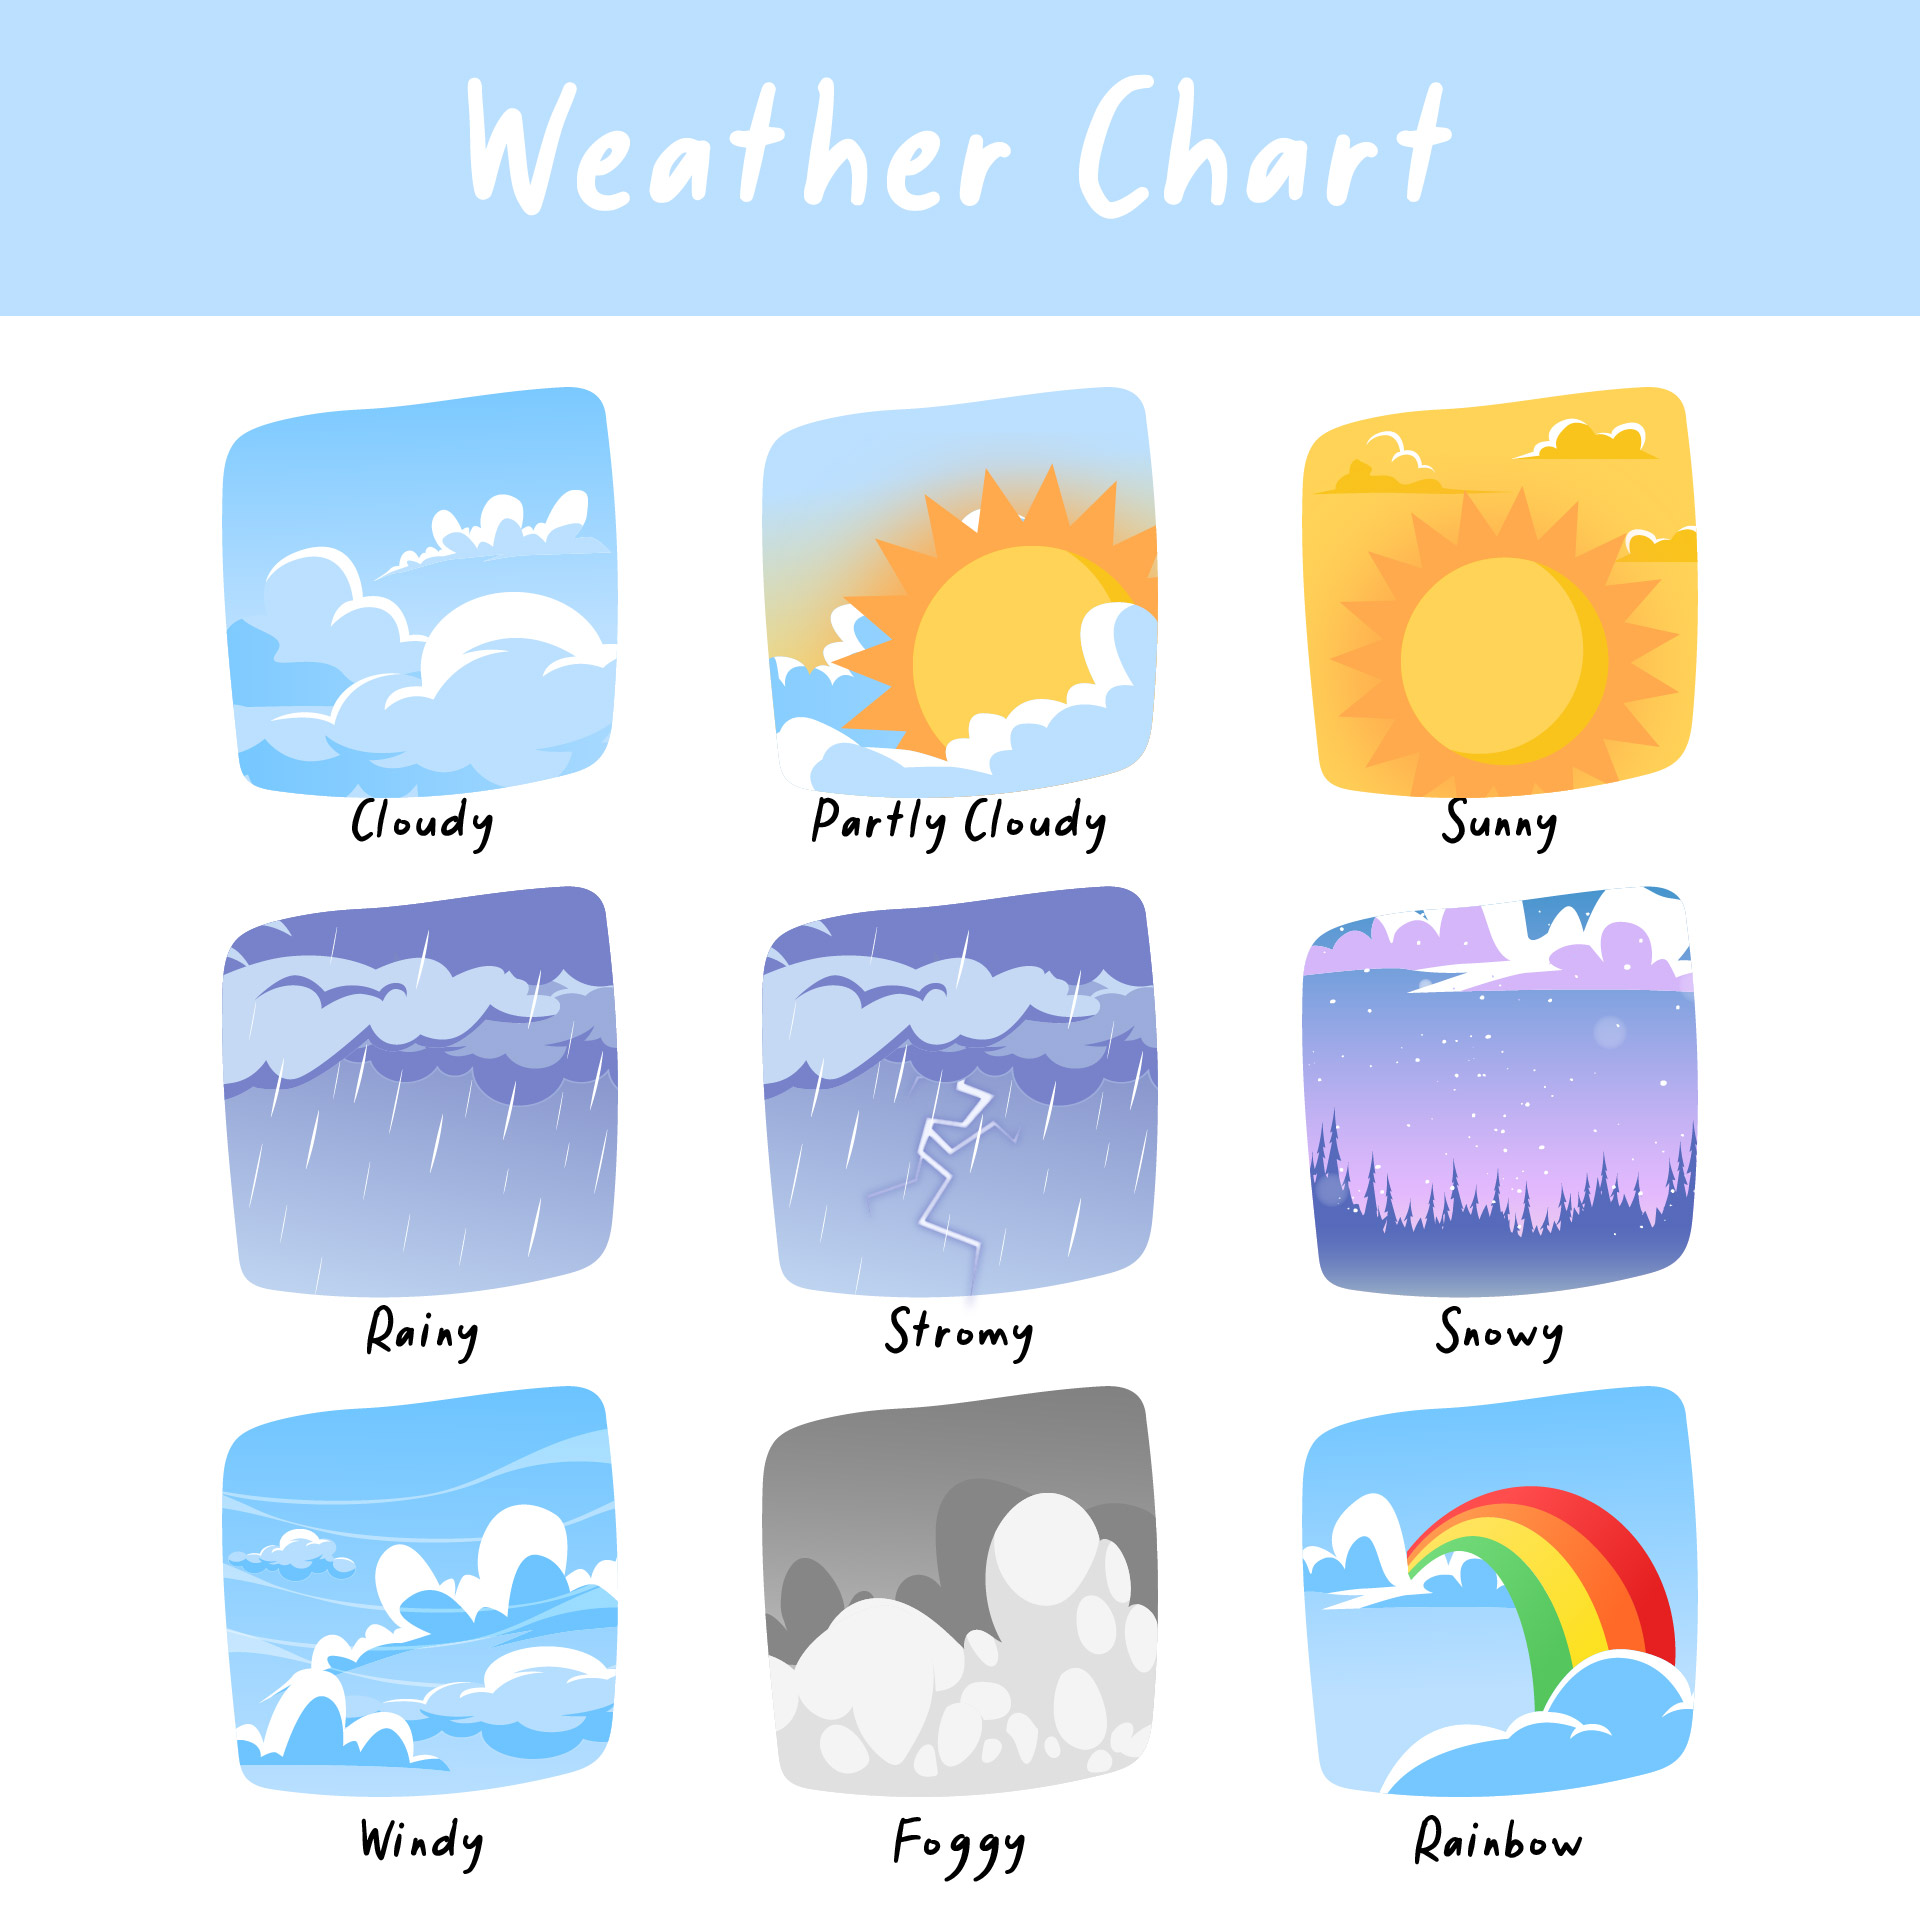 10 Best Printable Weather Chart For Kindergarten PDF for Free at Printablee